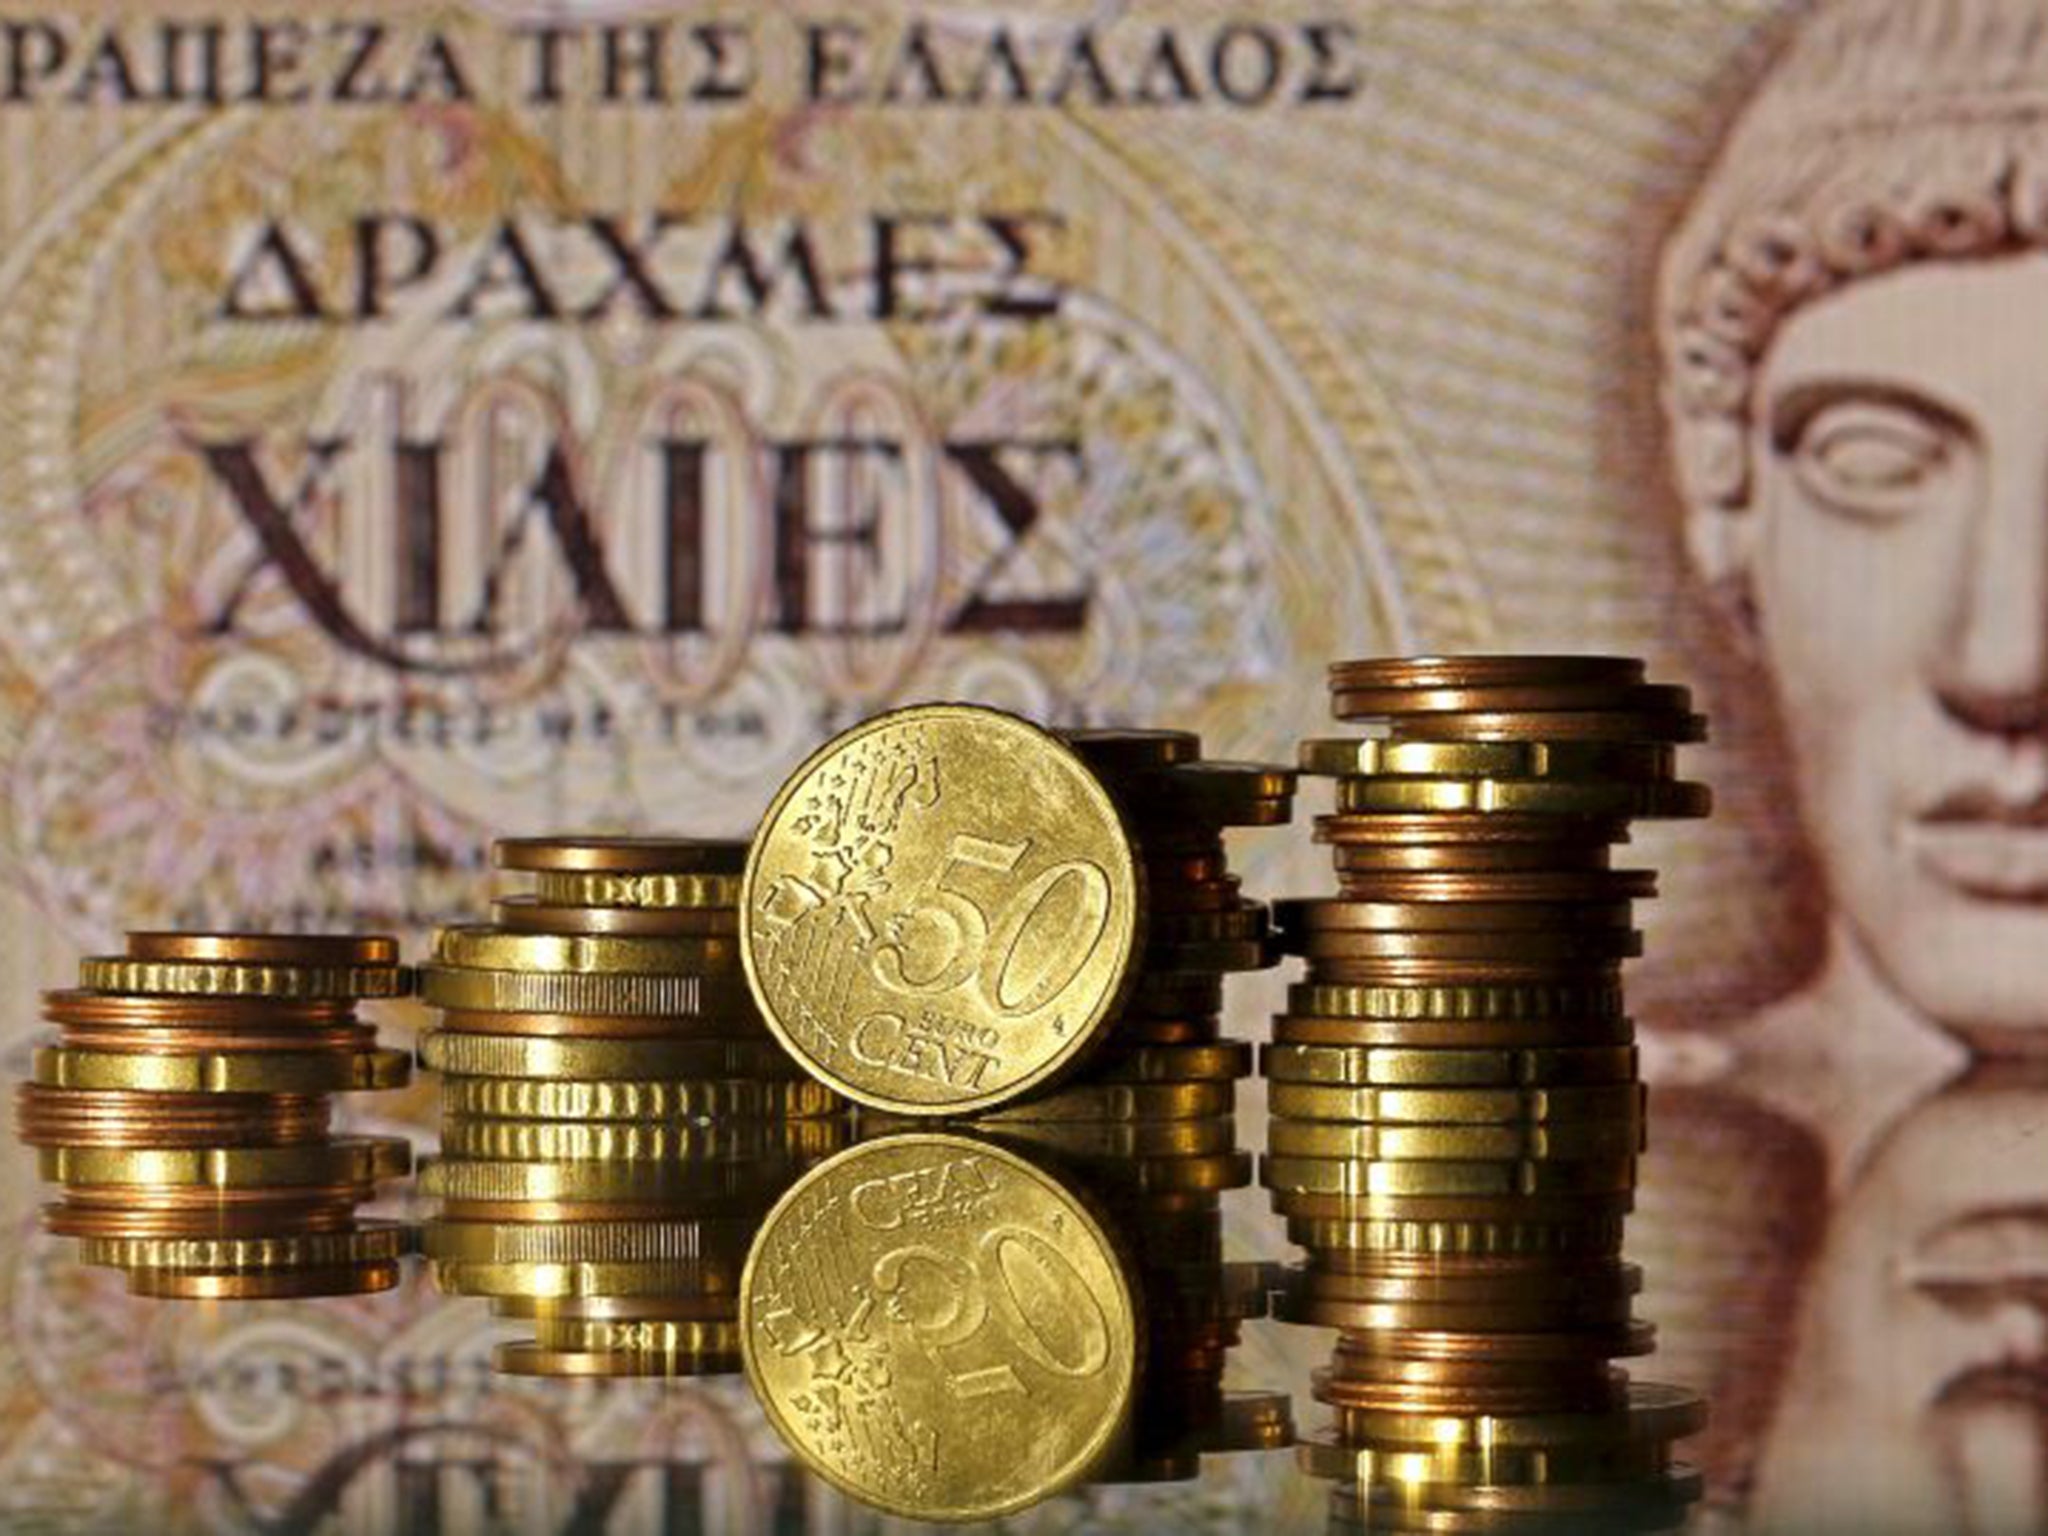 If Greece leave the single currency, perhaps returning to the Drachma, it would represent a shattering blow to the reputation of this generation of European leaders